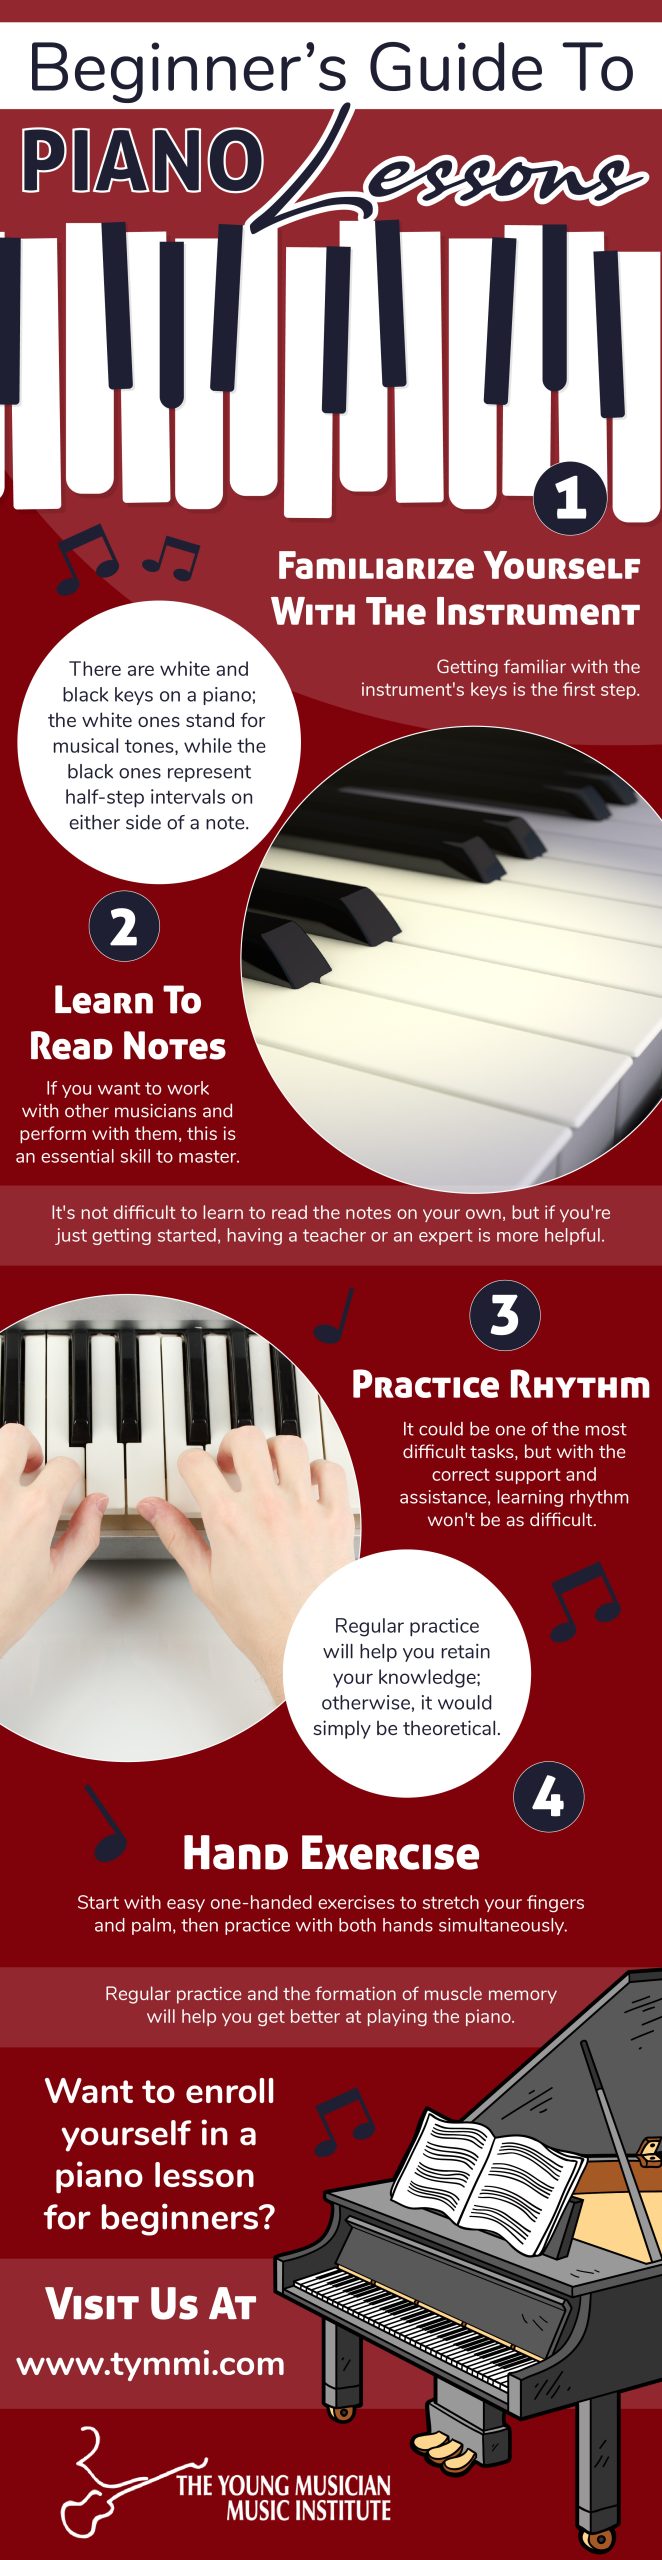 's guide to piano lessons